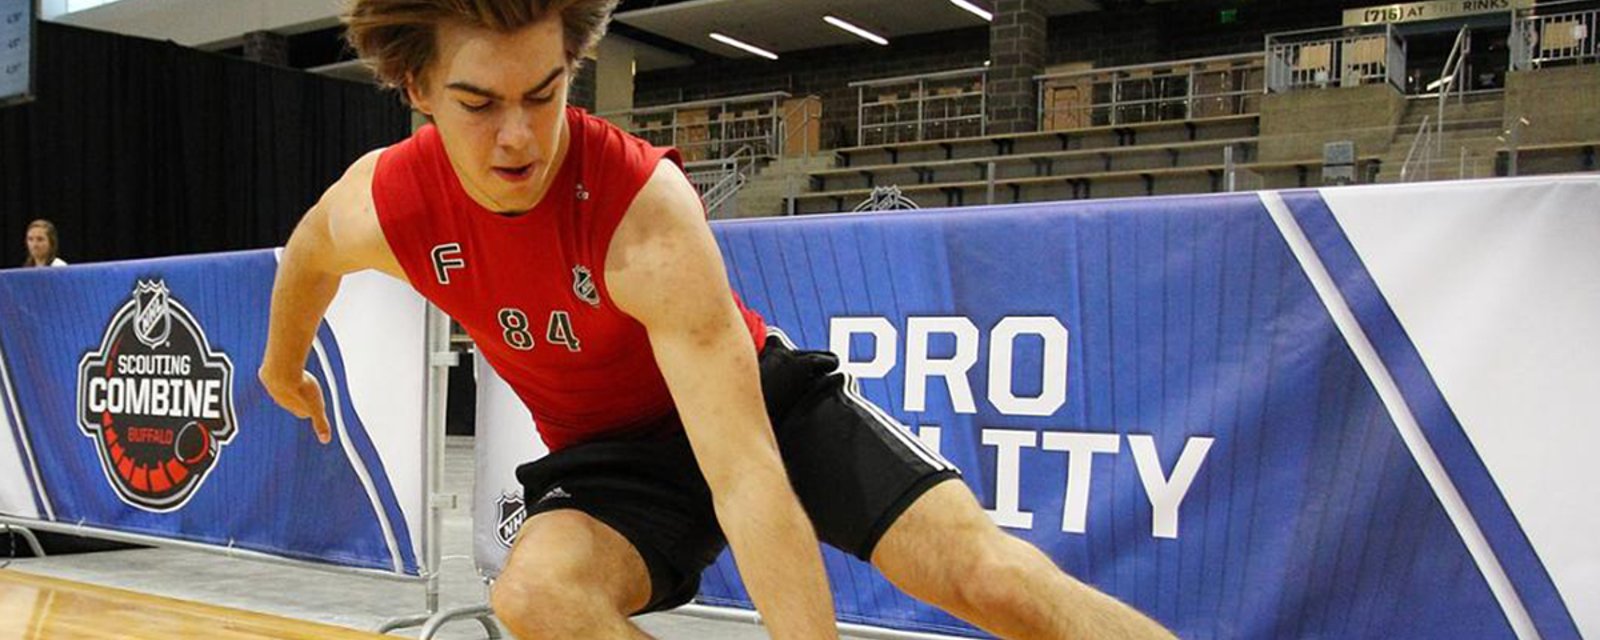 Just in: The top 25 in fitness testing from the NHL Draft Combine